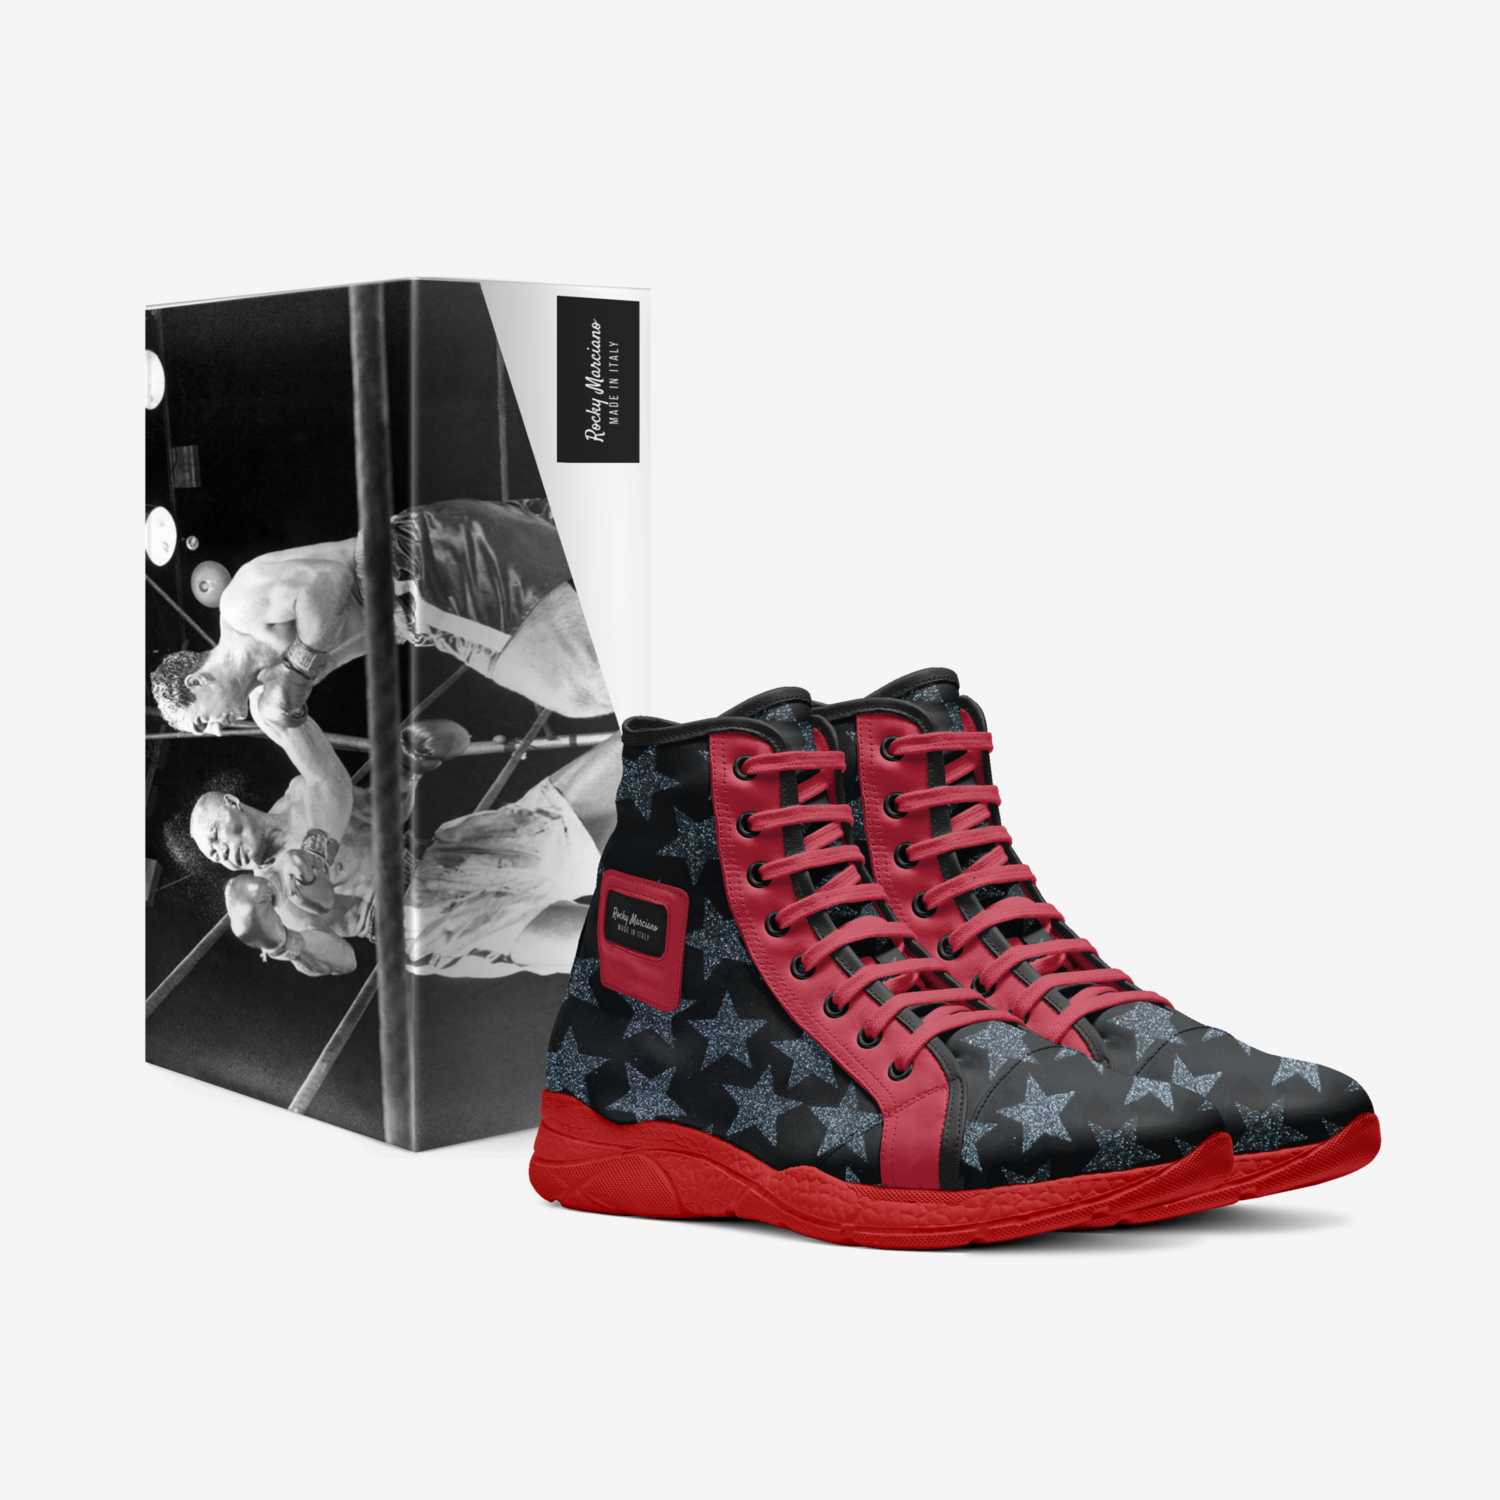 Rocky Marciano custom made in Italy shoes by Ivan Venerucci | Box view